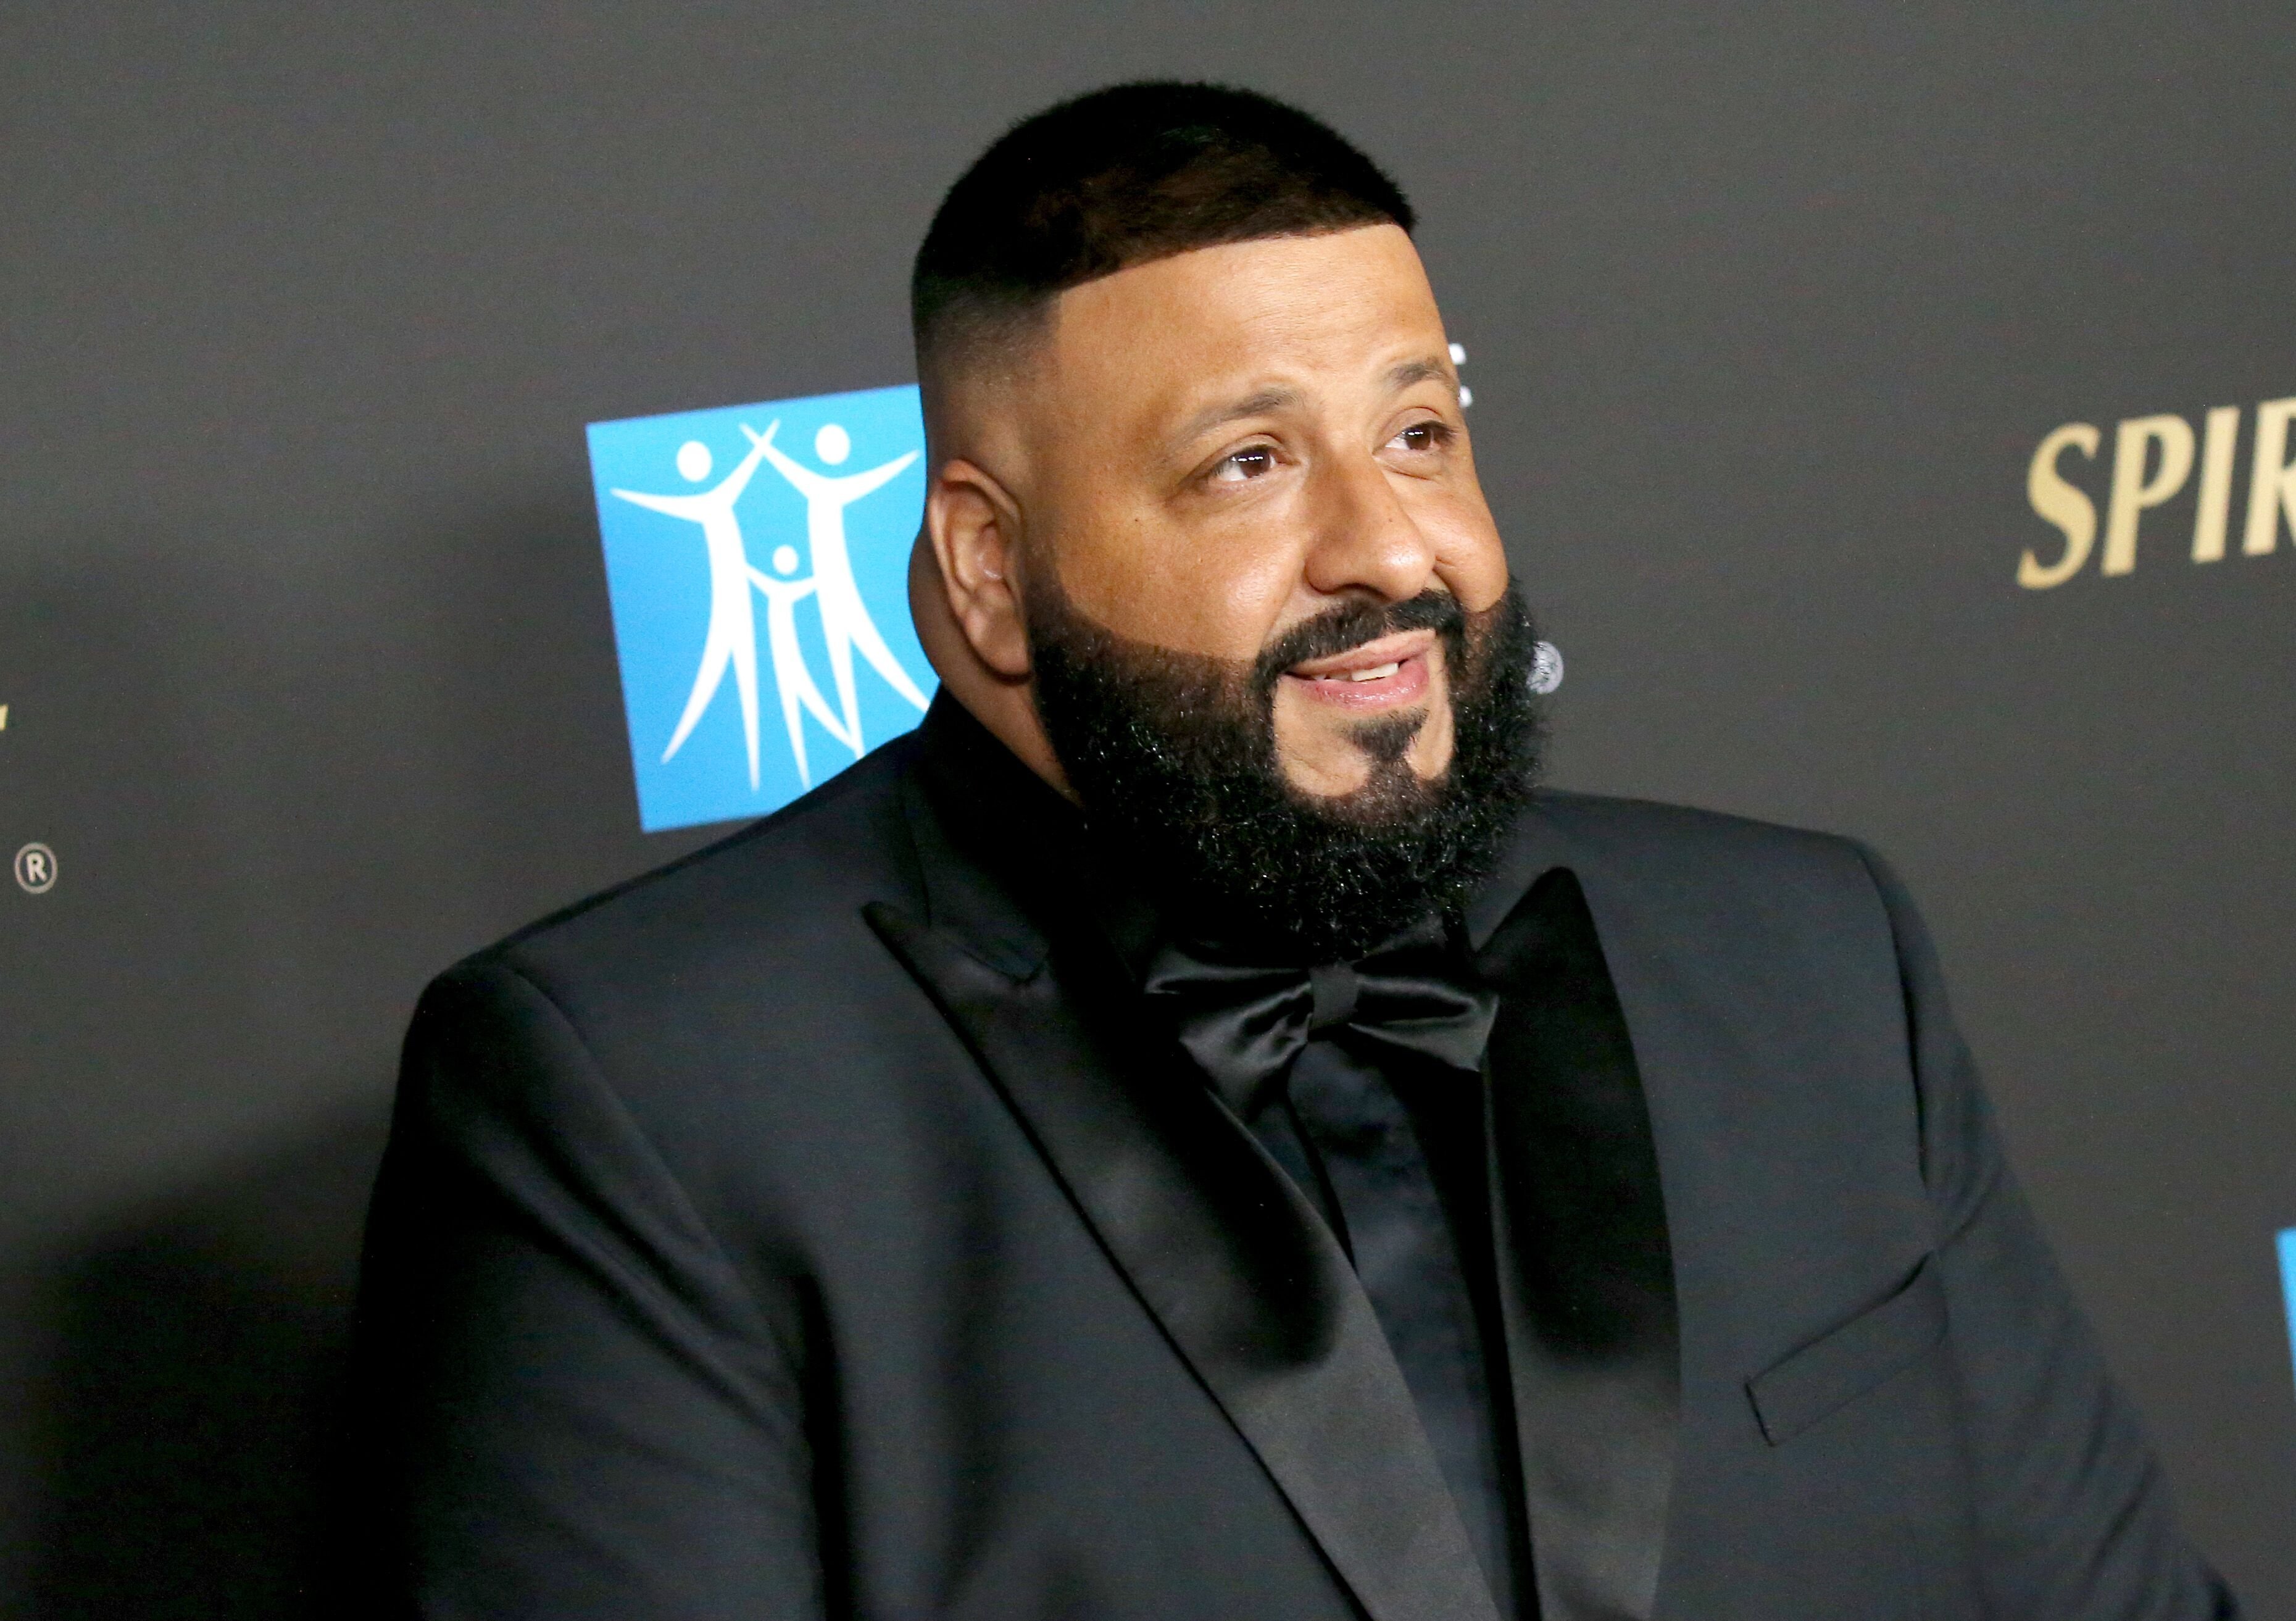 DJ Khaled attends the City Of Hope's Spirit of Life 2019 Gala held at The Barker Hanger in Santa Monica, California on October 10, 2019. | Photo: Getty Images